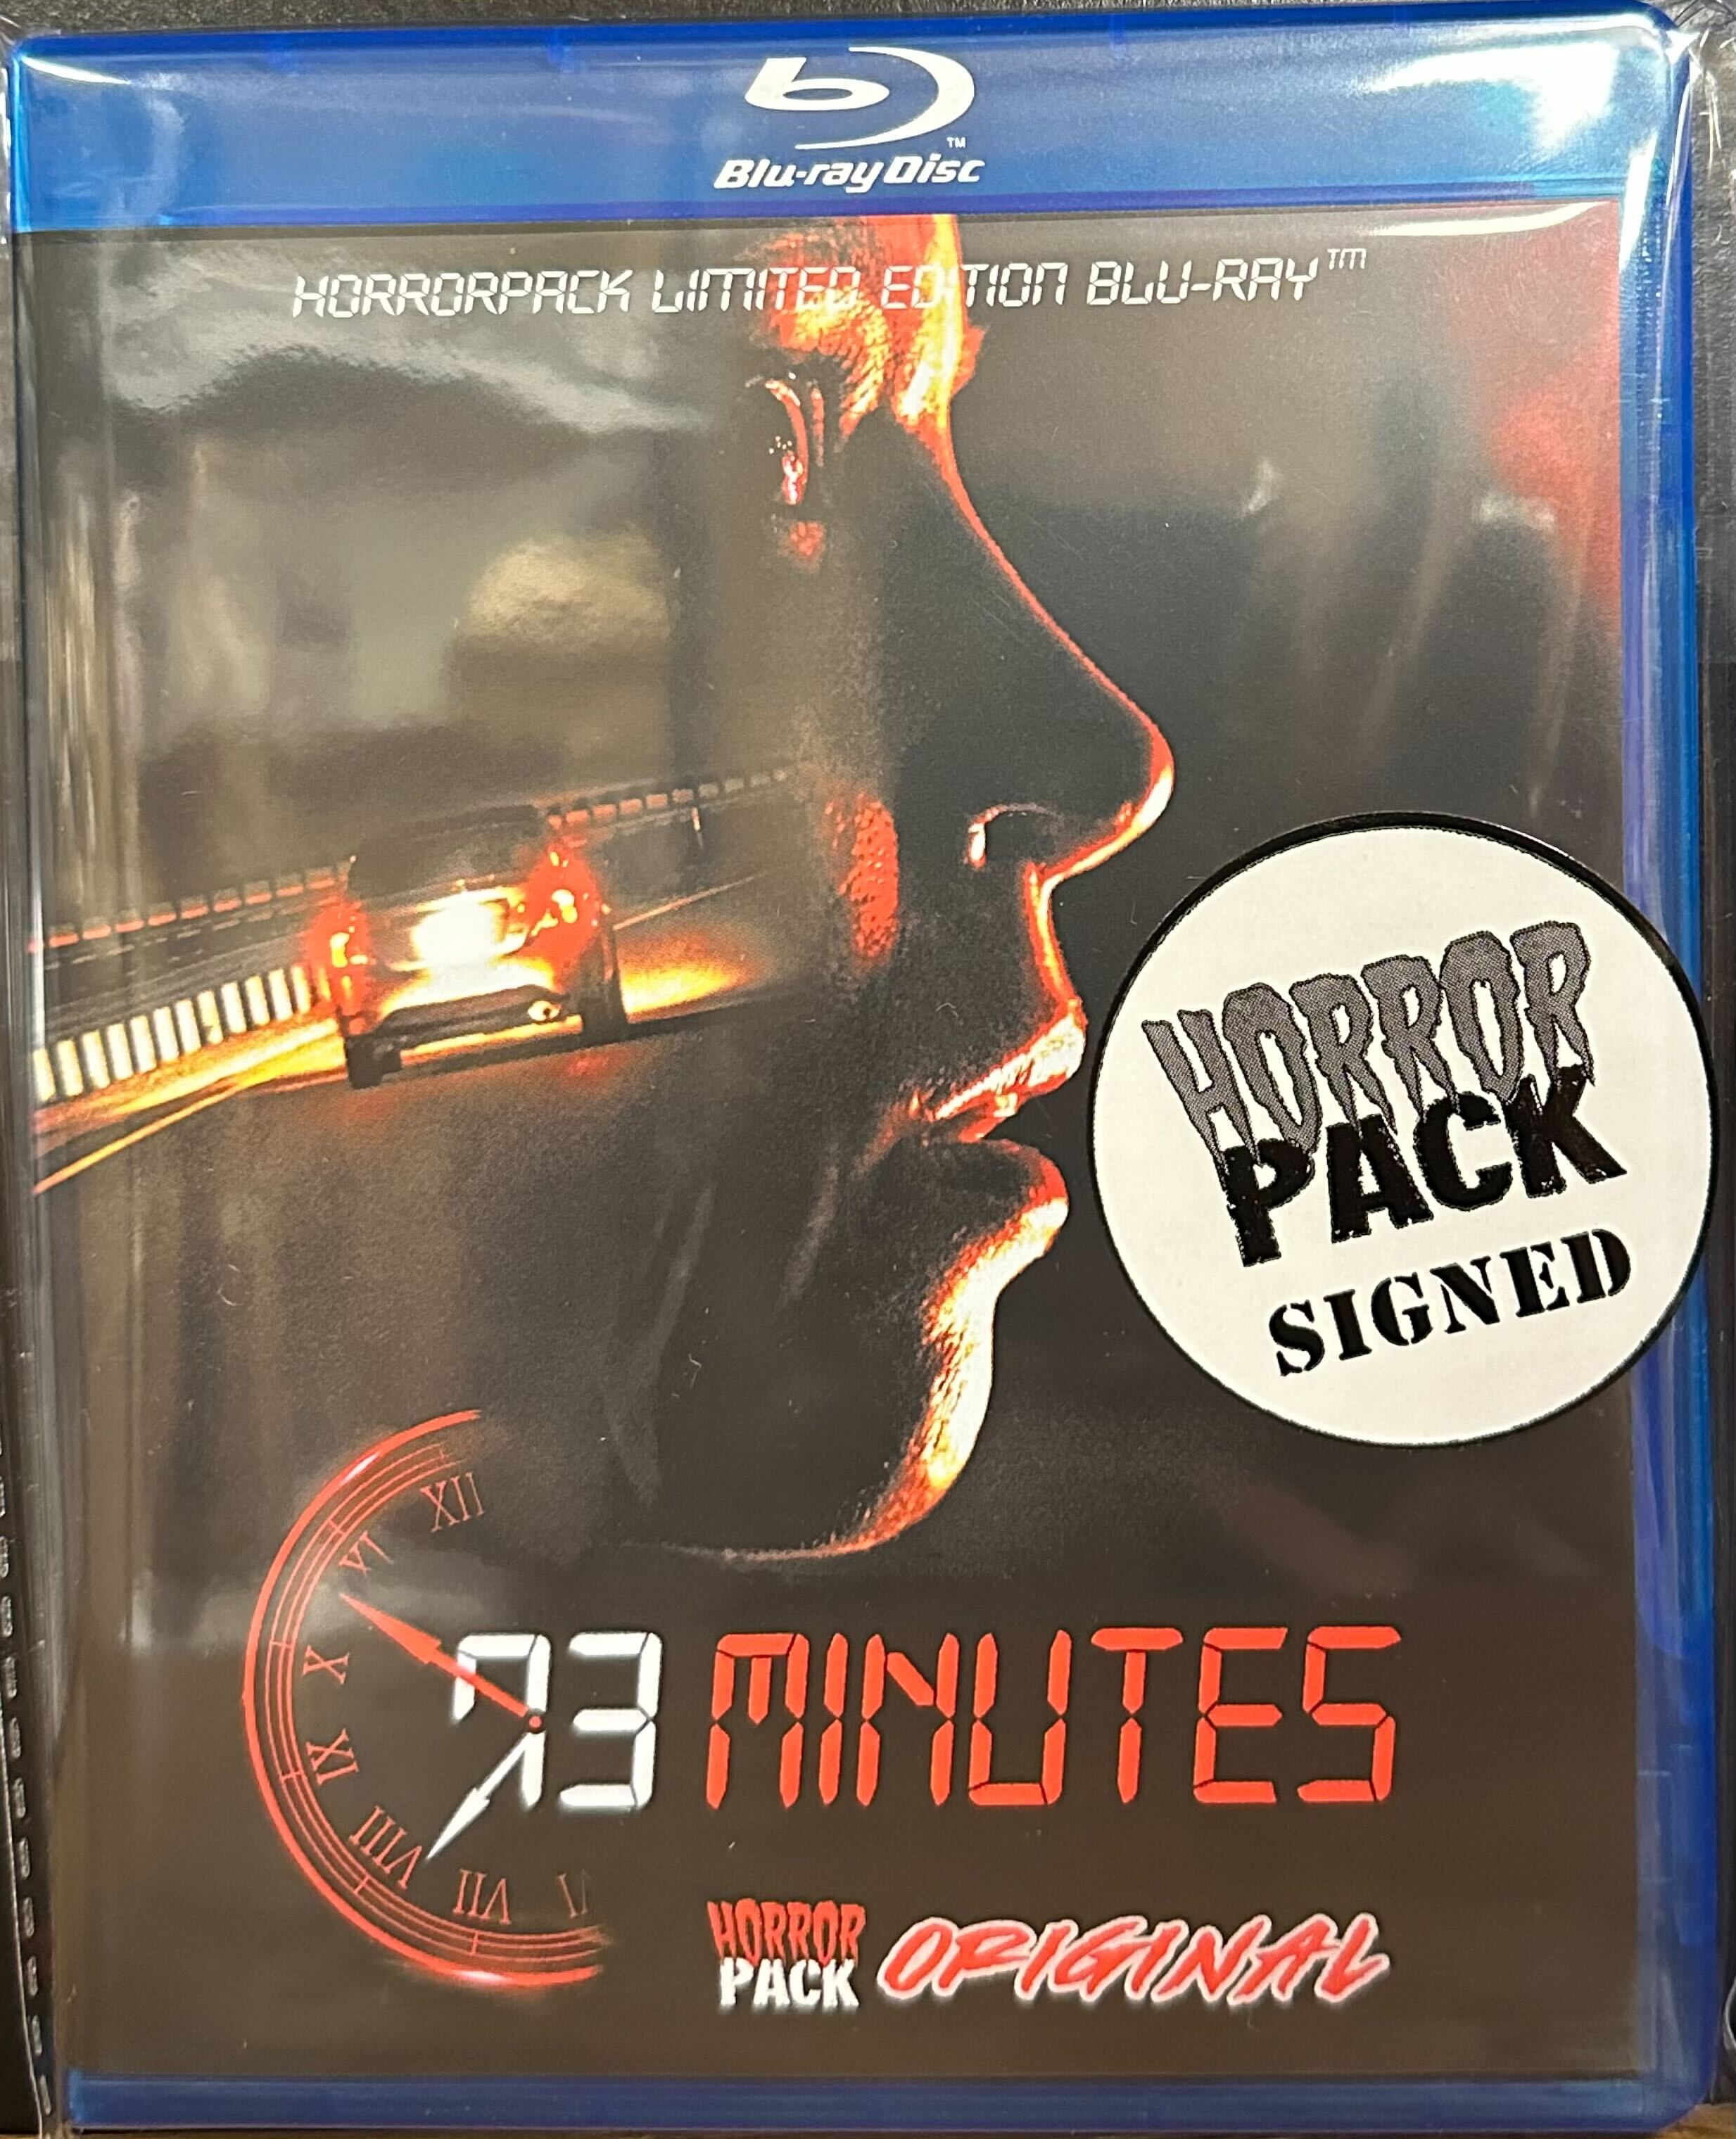 73 Minutes - HorrorPack Limited Edition Blu-ray #82